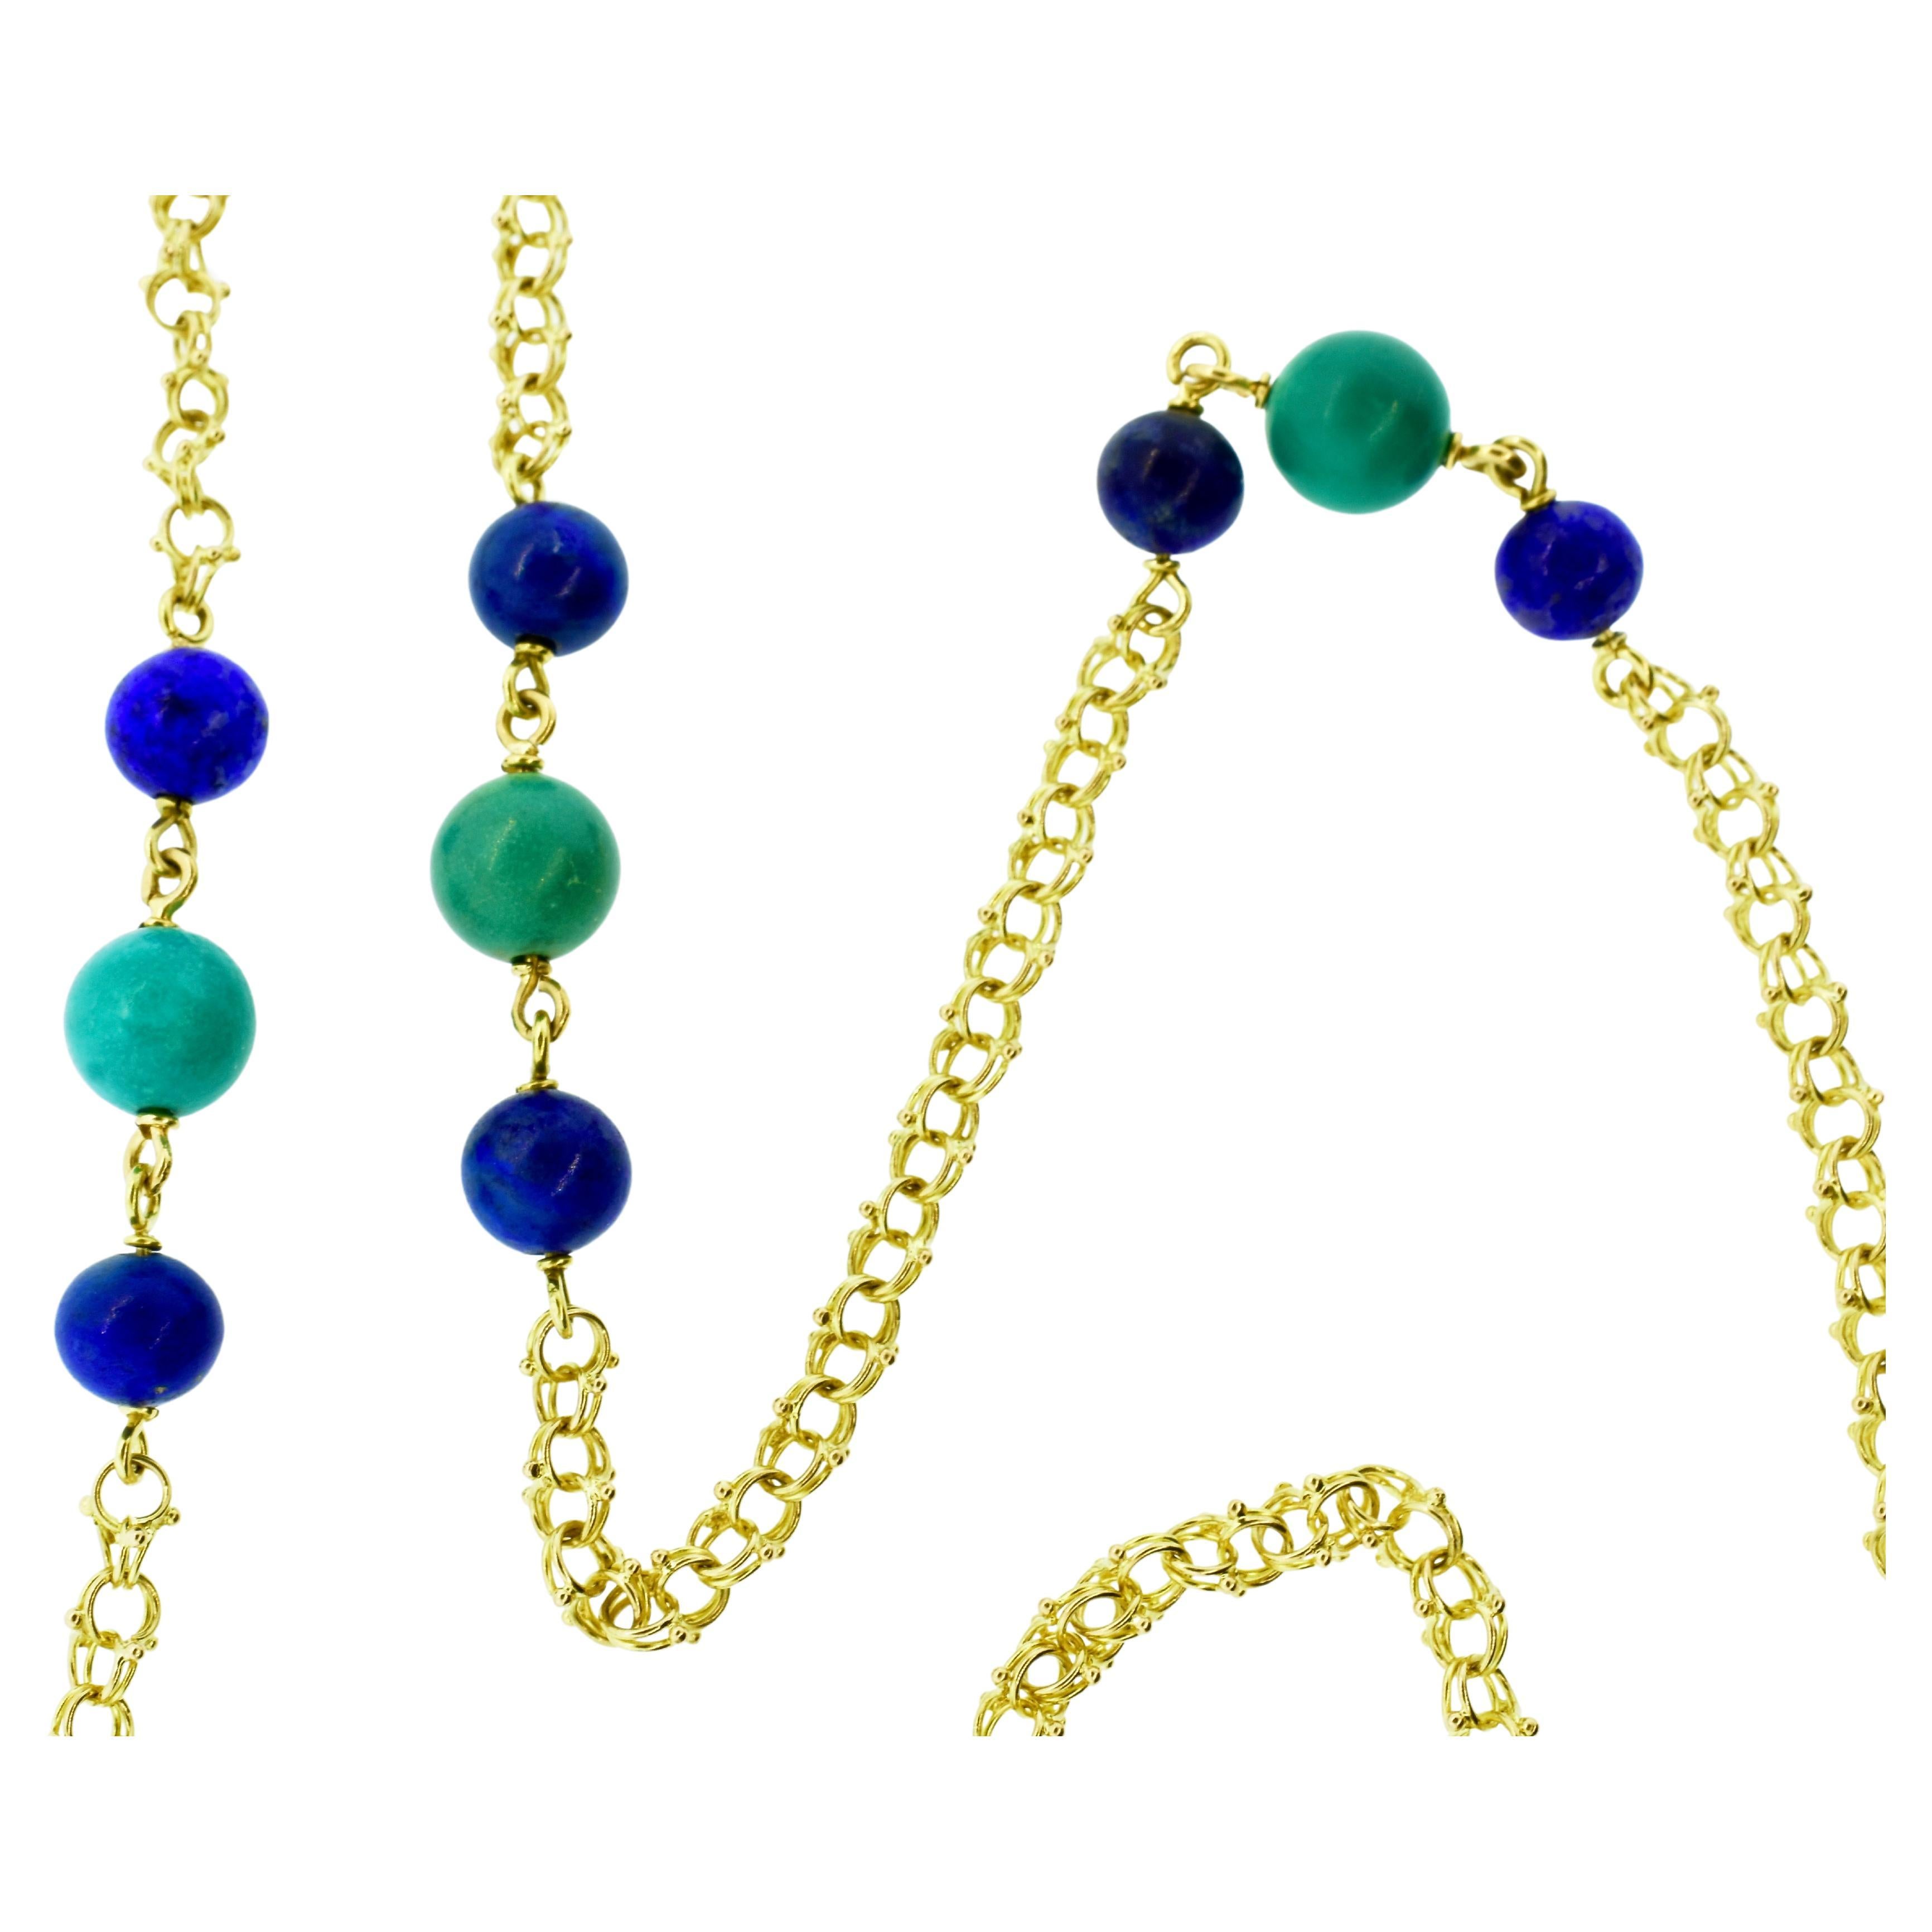 Contemporary Vintage Long Gold Chain interspersed with Lapis and Turquoise, c. 1960